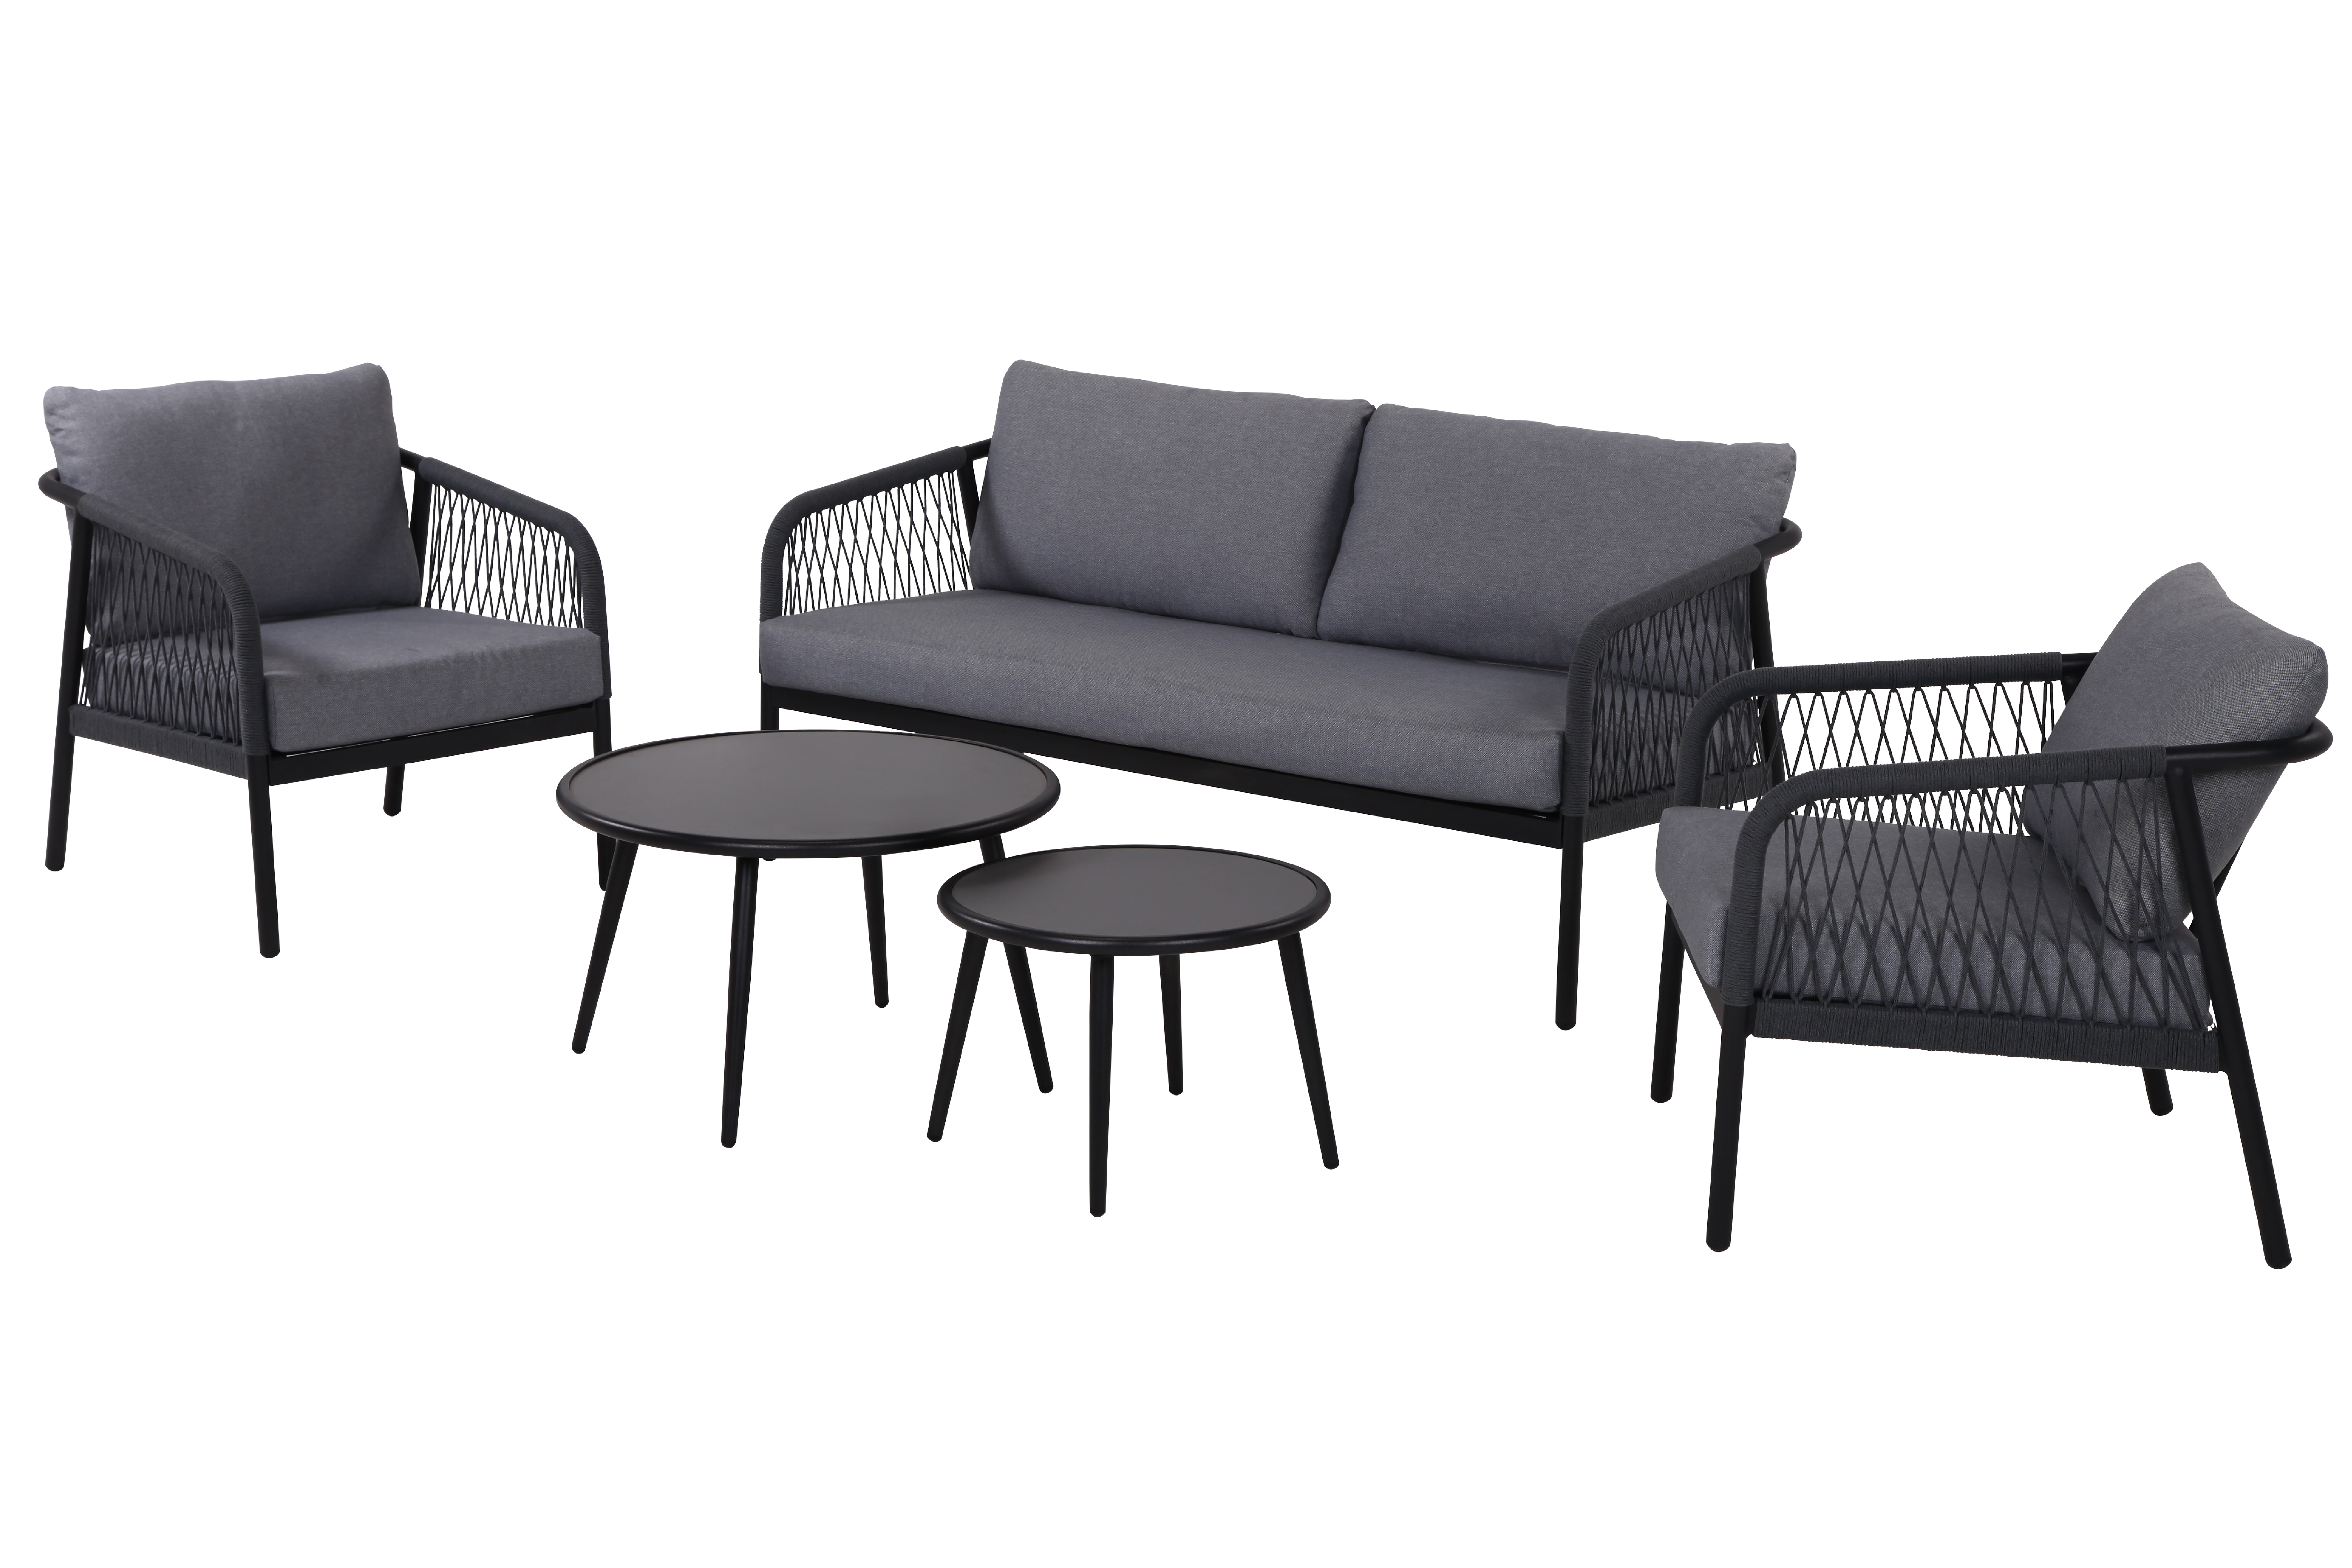 Outdoor Aluminium and Rope Lounge Chair – Charcoal dark grey, with outdoor cushions